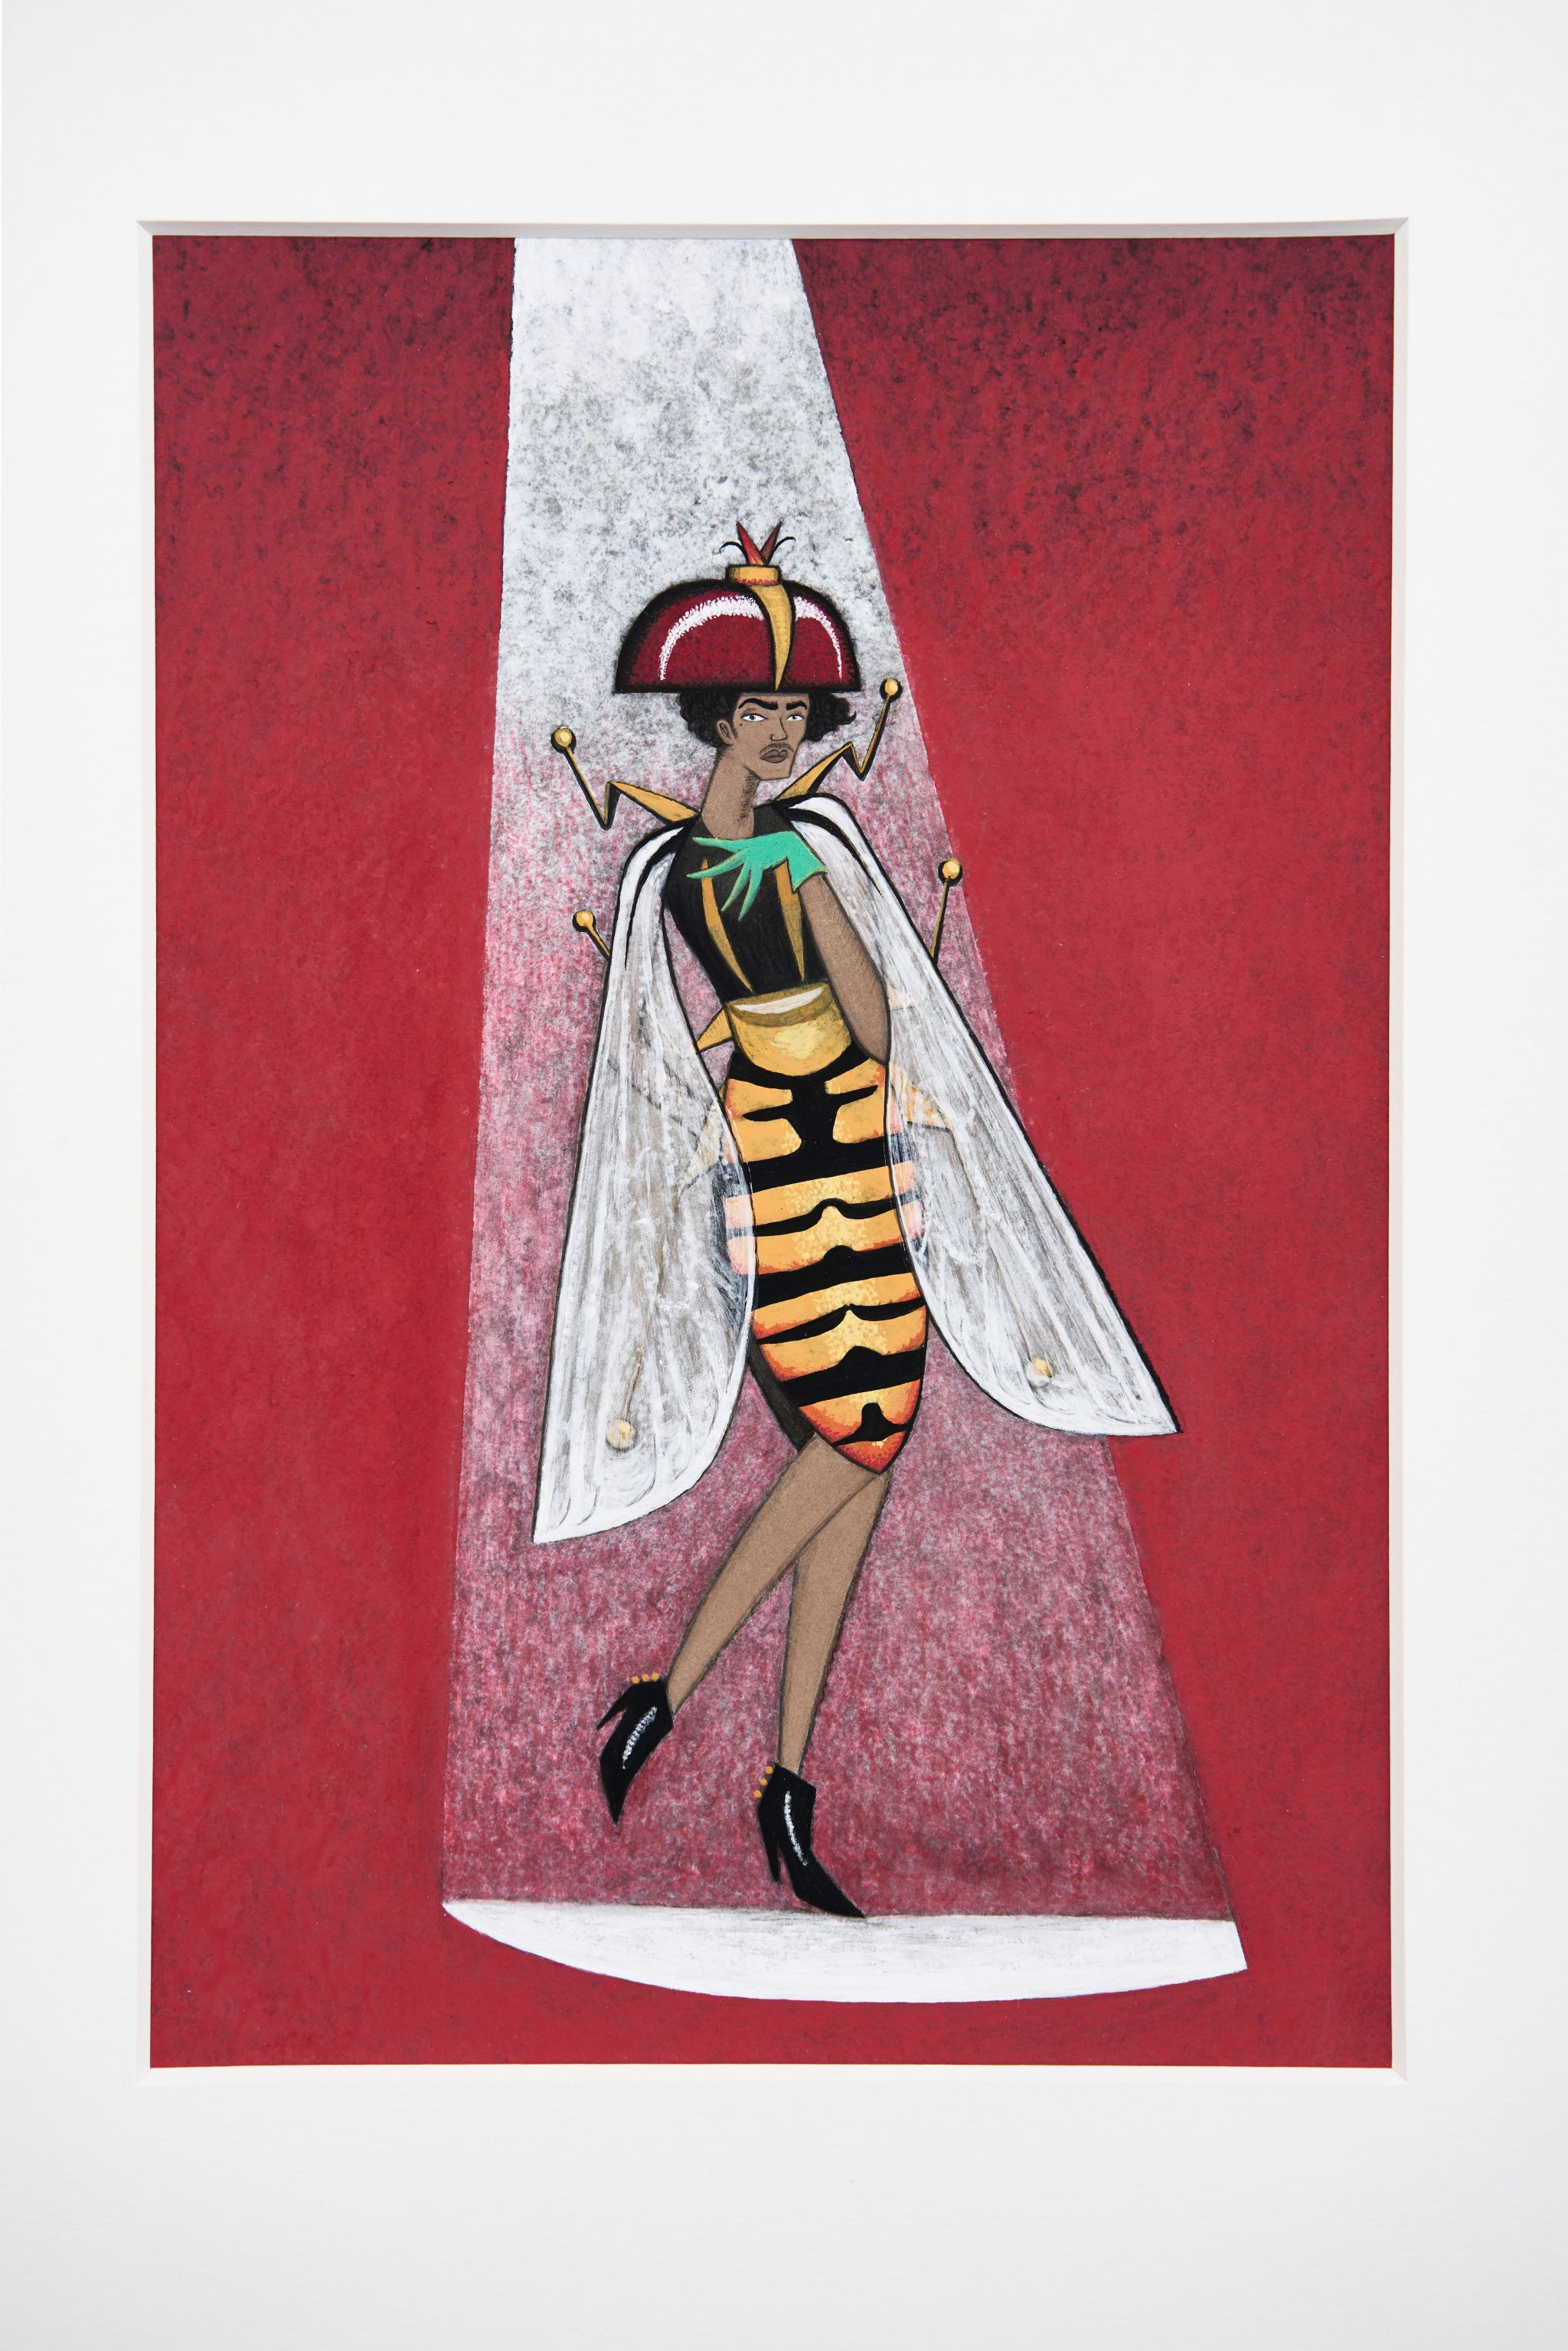 Jonathan Penca, Insect of the year 2004 (Hainschwebfliege), 2018, Gouache and ink on cardboard, 53.5 ⁠× ⁠41 ⁠⁠cm